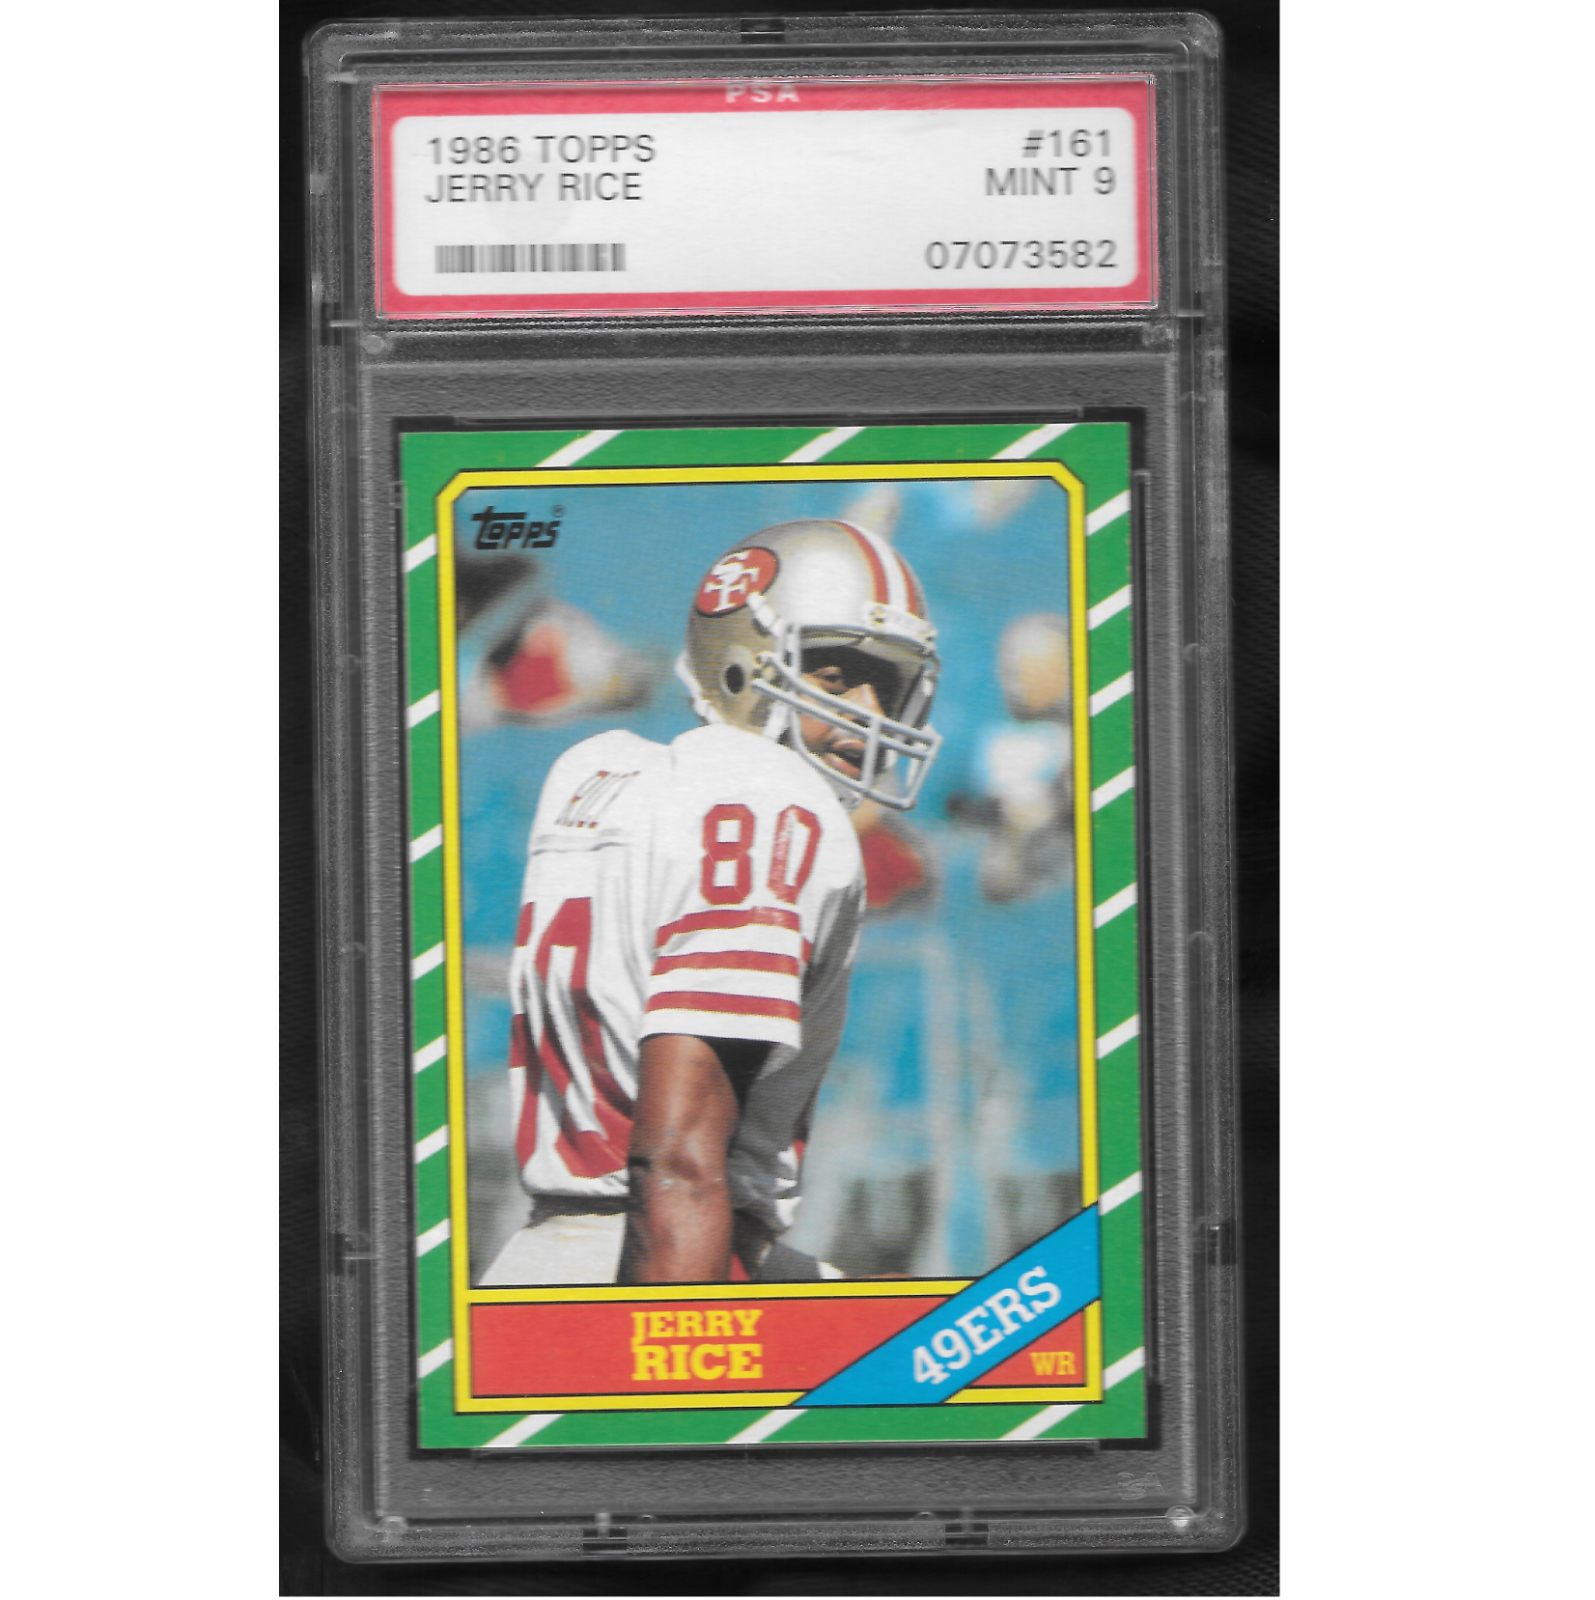 1986 Topps Football Jerry Rice ROOKIE RC 161 PSA 9 MINT 